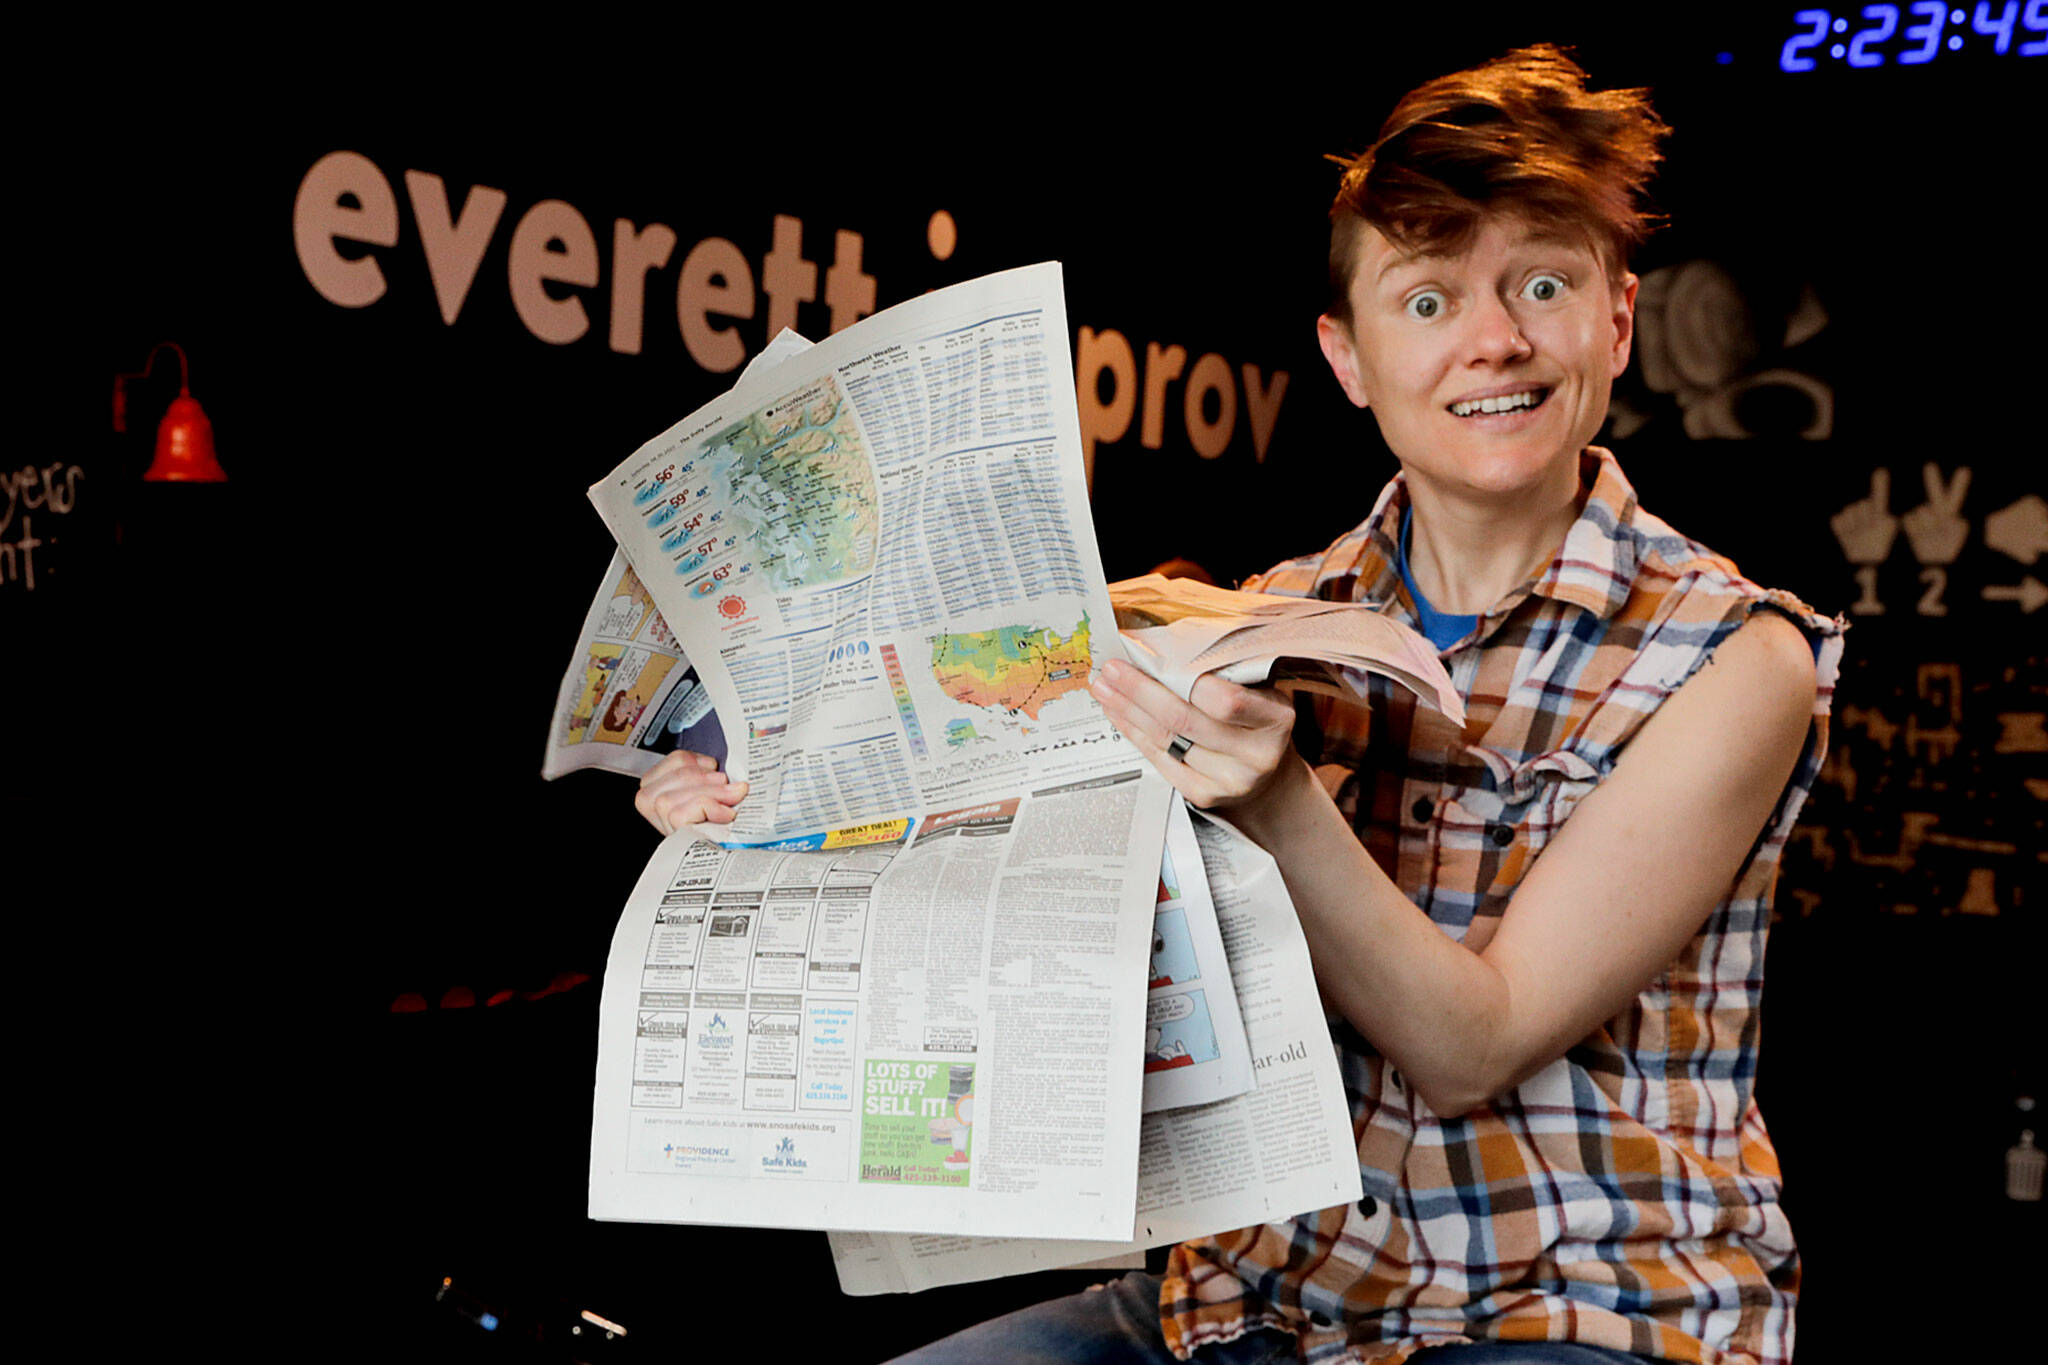 Britney Barber, owner of Everett Improv, performs a show based on headlines pulled from local newspapers. (Kevin Clark / The Herald)